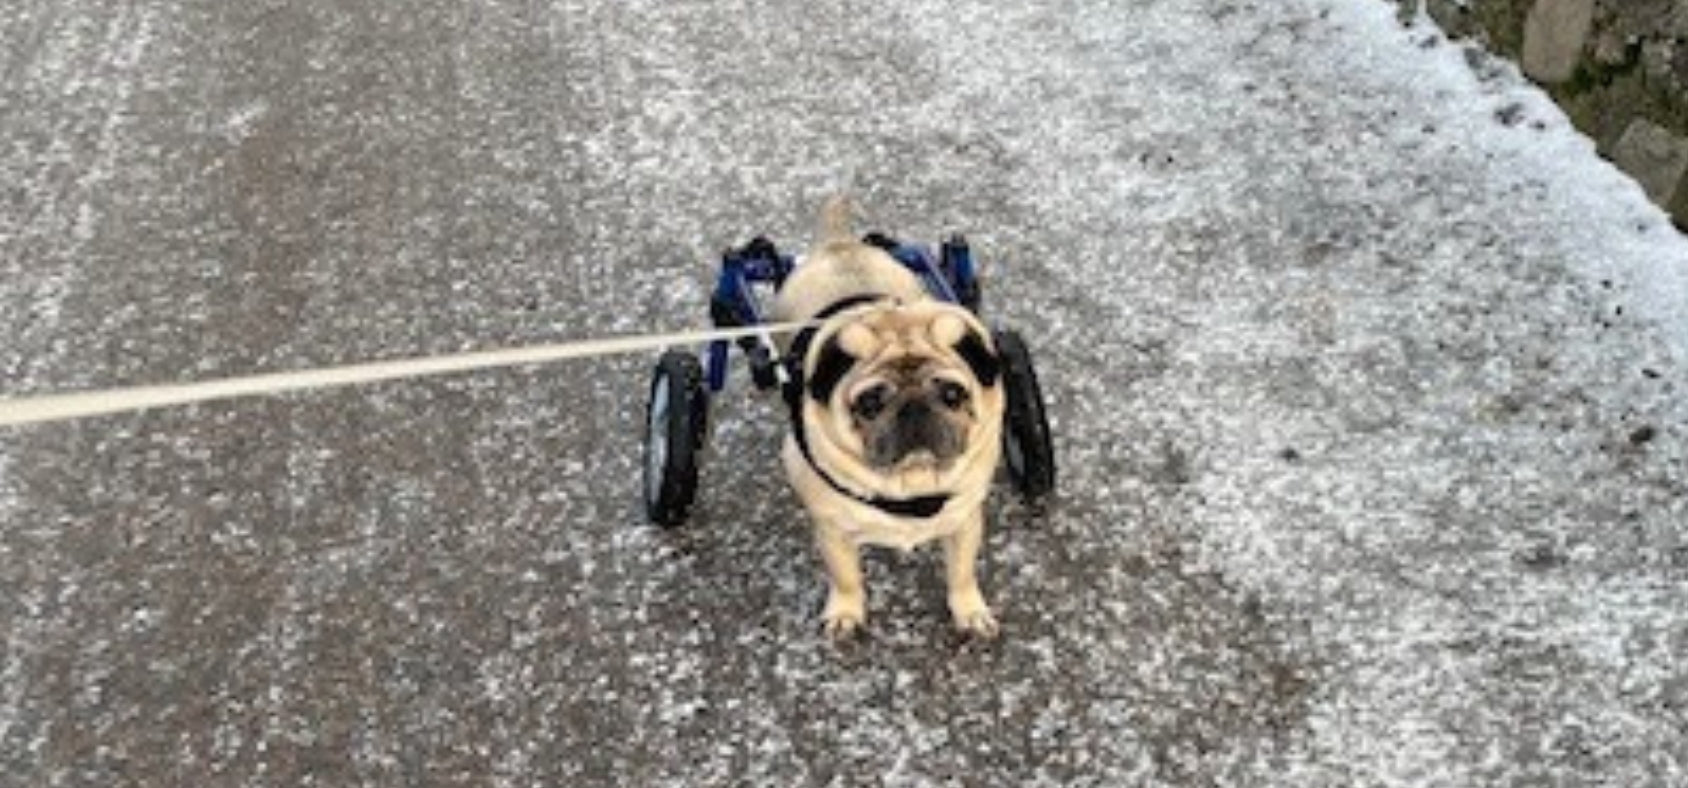 Dog Wheelchairs for Dogs with Hind Limb Paralysis